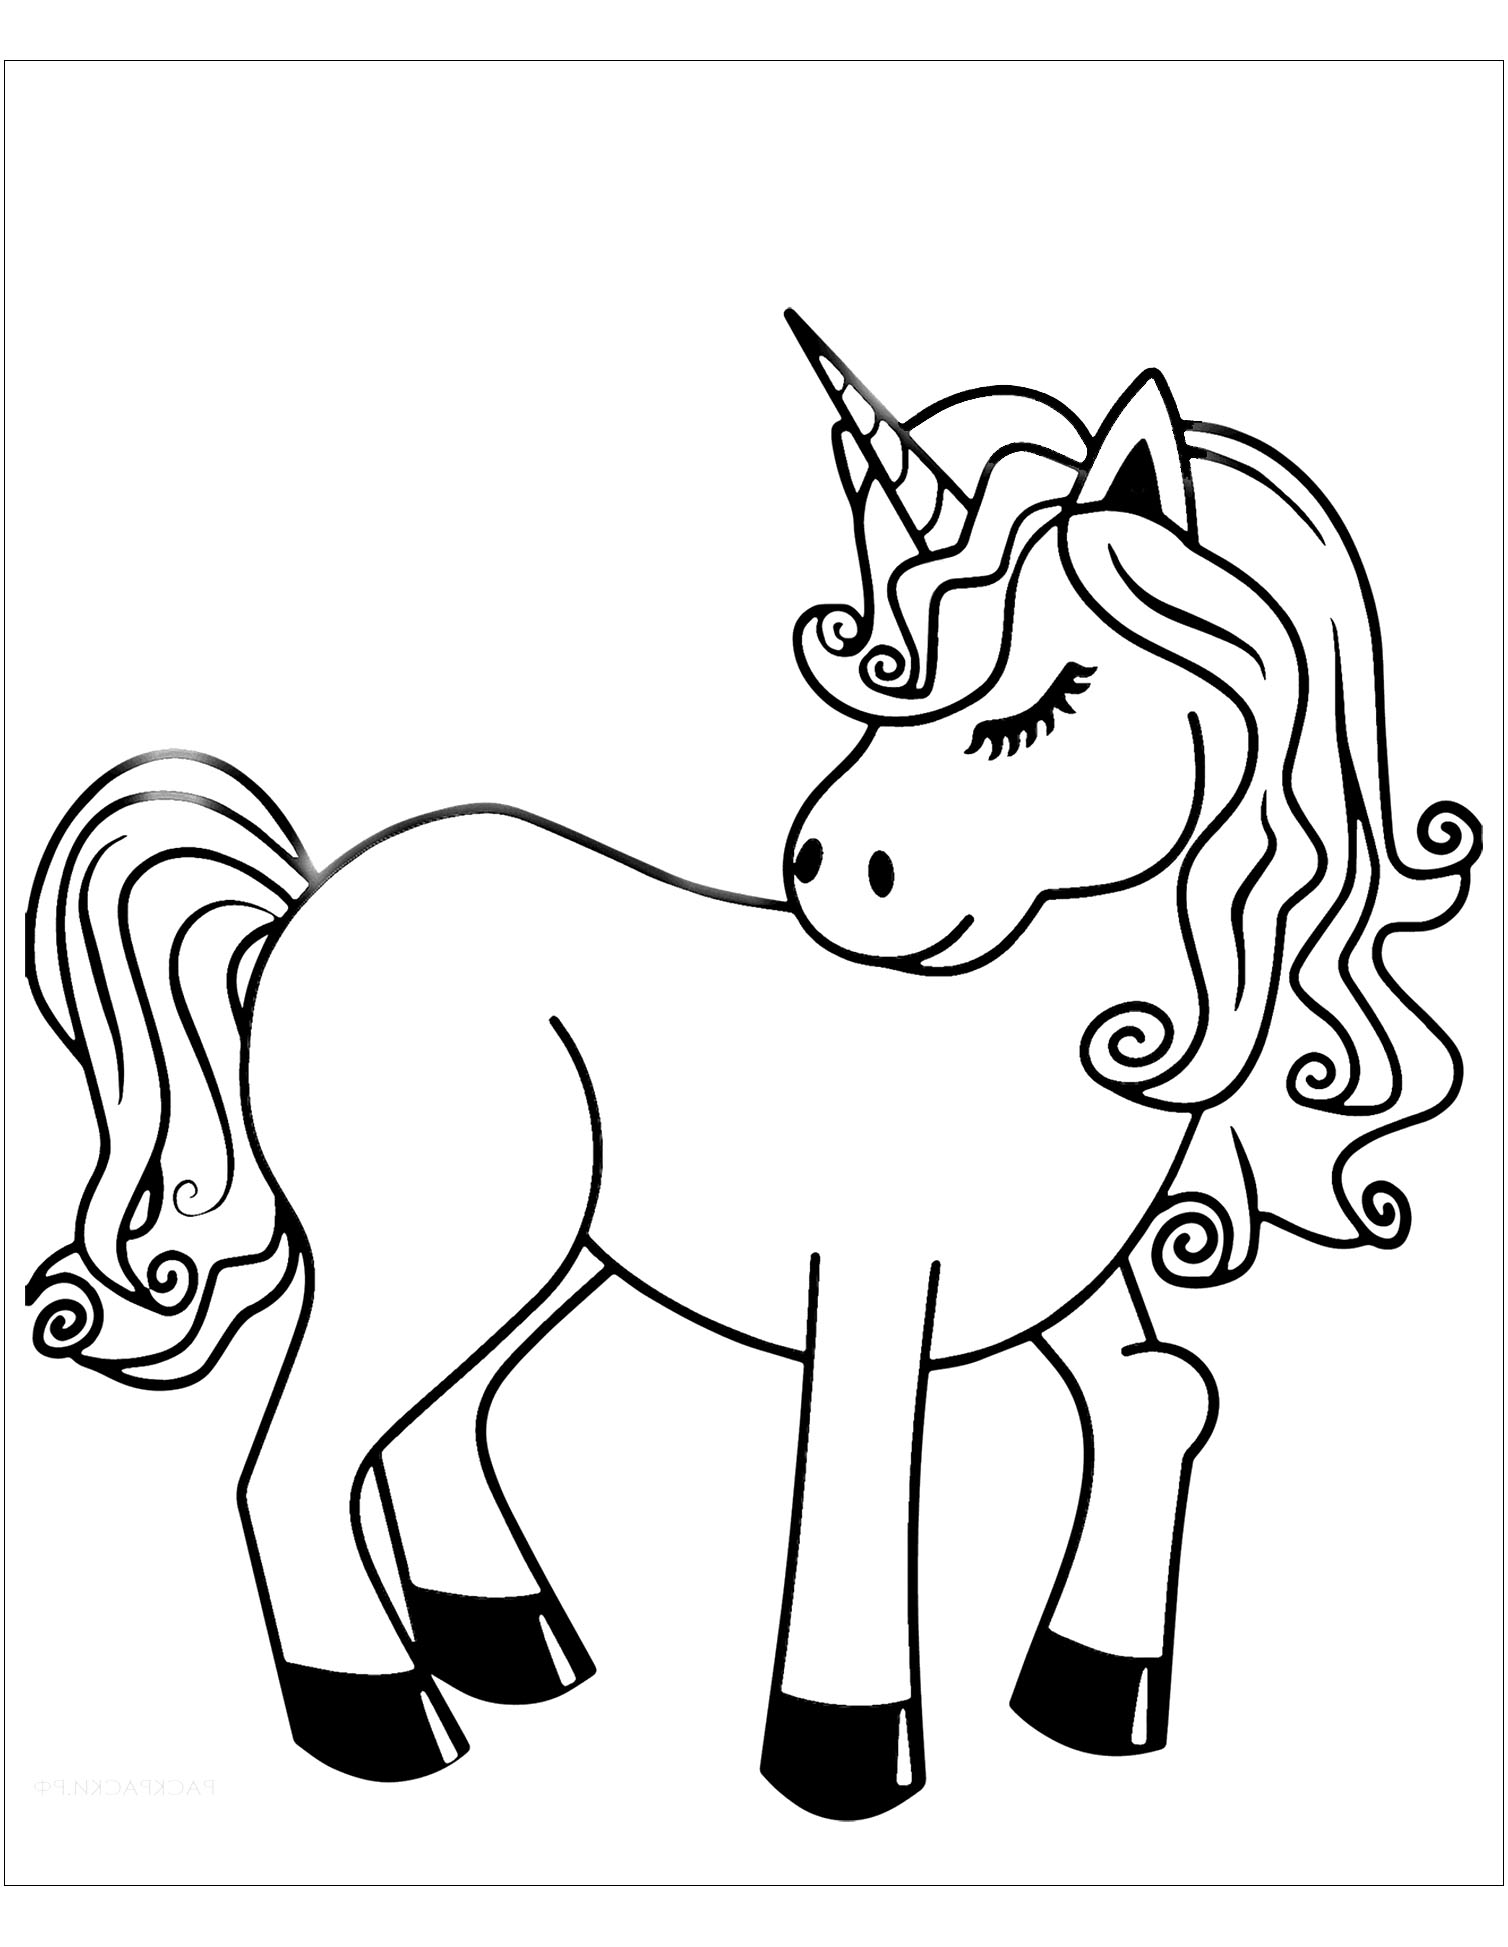 Unicorn Coloring Pages For Kids Unicorns Kids Coloring Pages